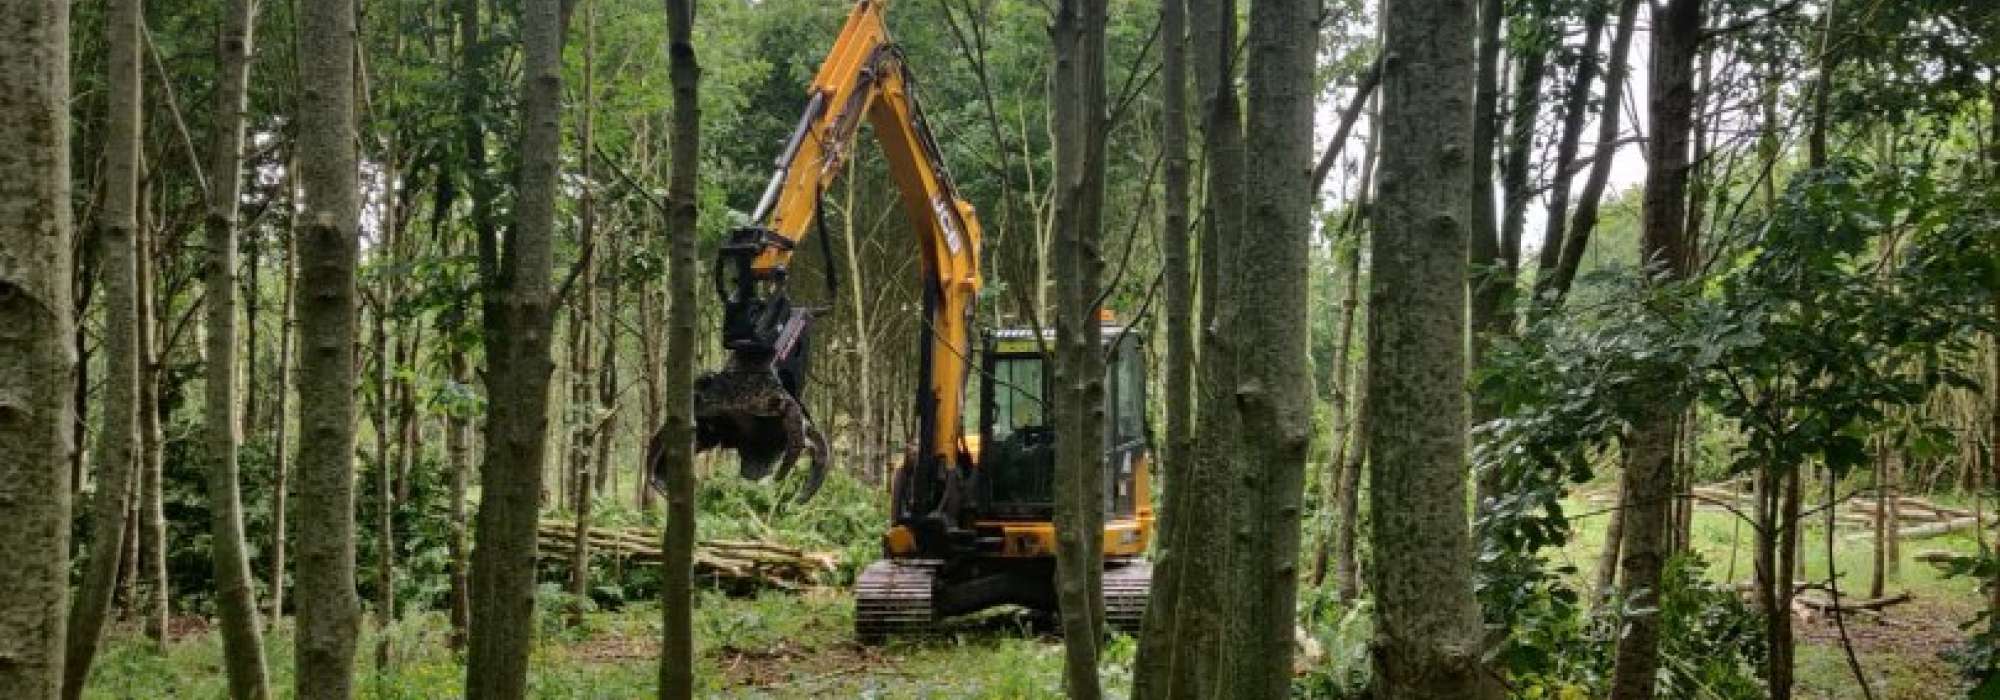 A digger in a woodland, picking up trees that have just been cut down to begin the process of felling.